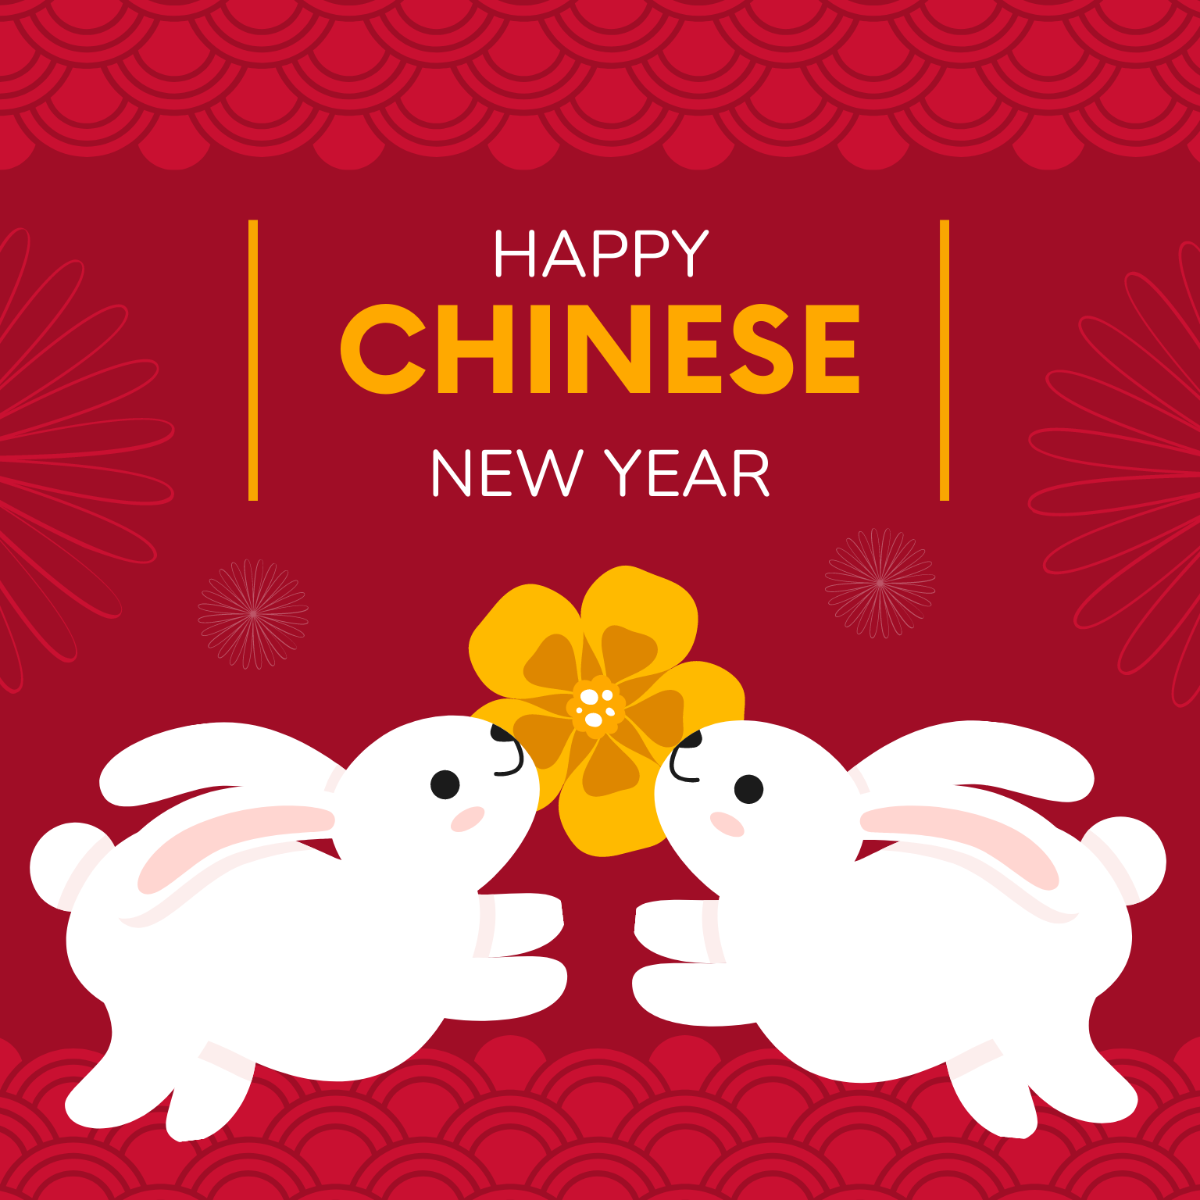 Happy Chinese New Year Illustration Template